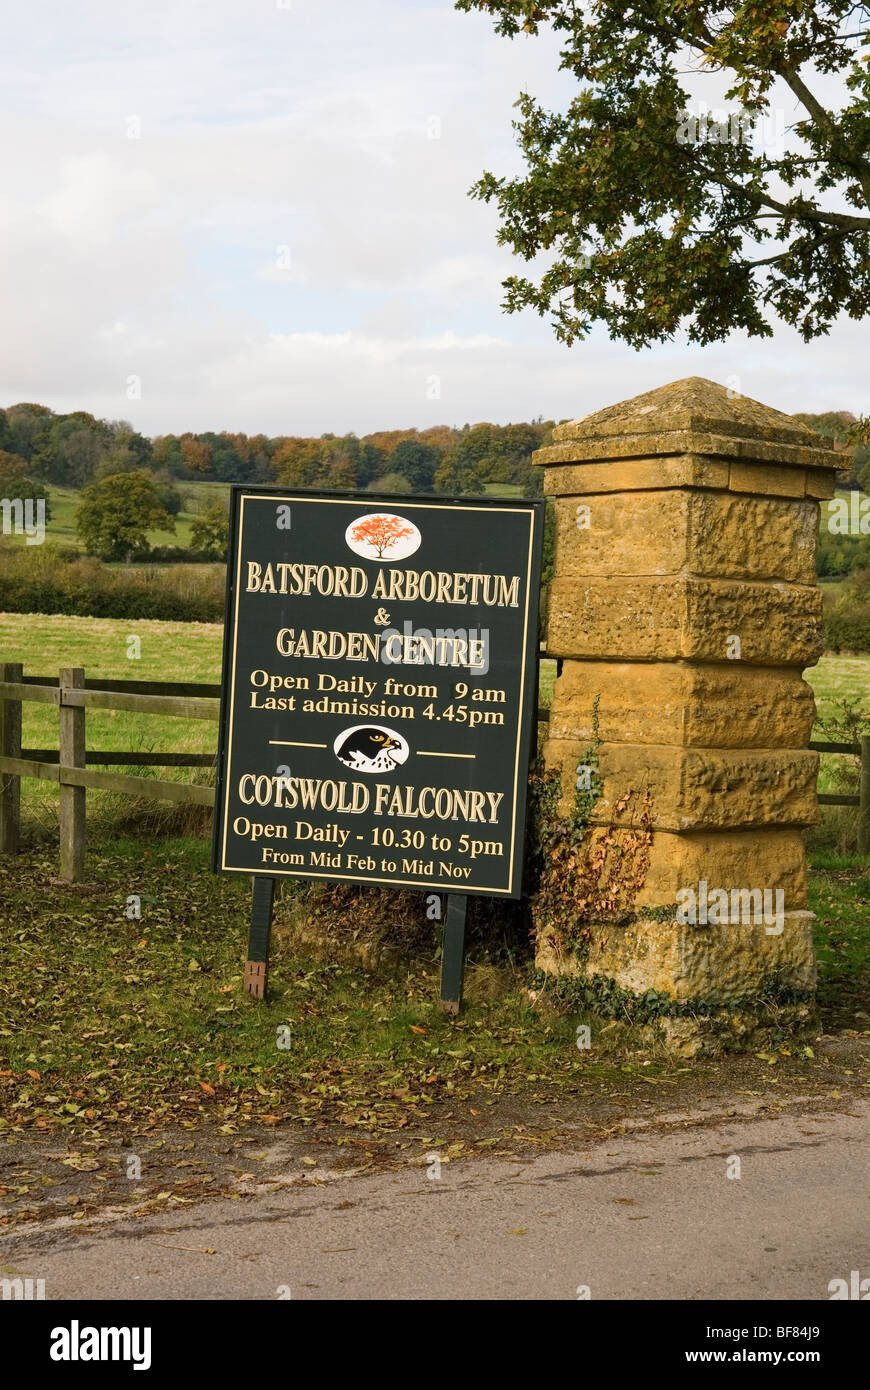 Information Sign for Batsford Arboretum and Garden Centre and Cotswold Falconry Stock Photo